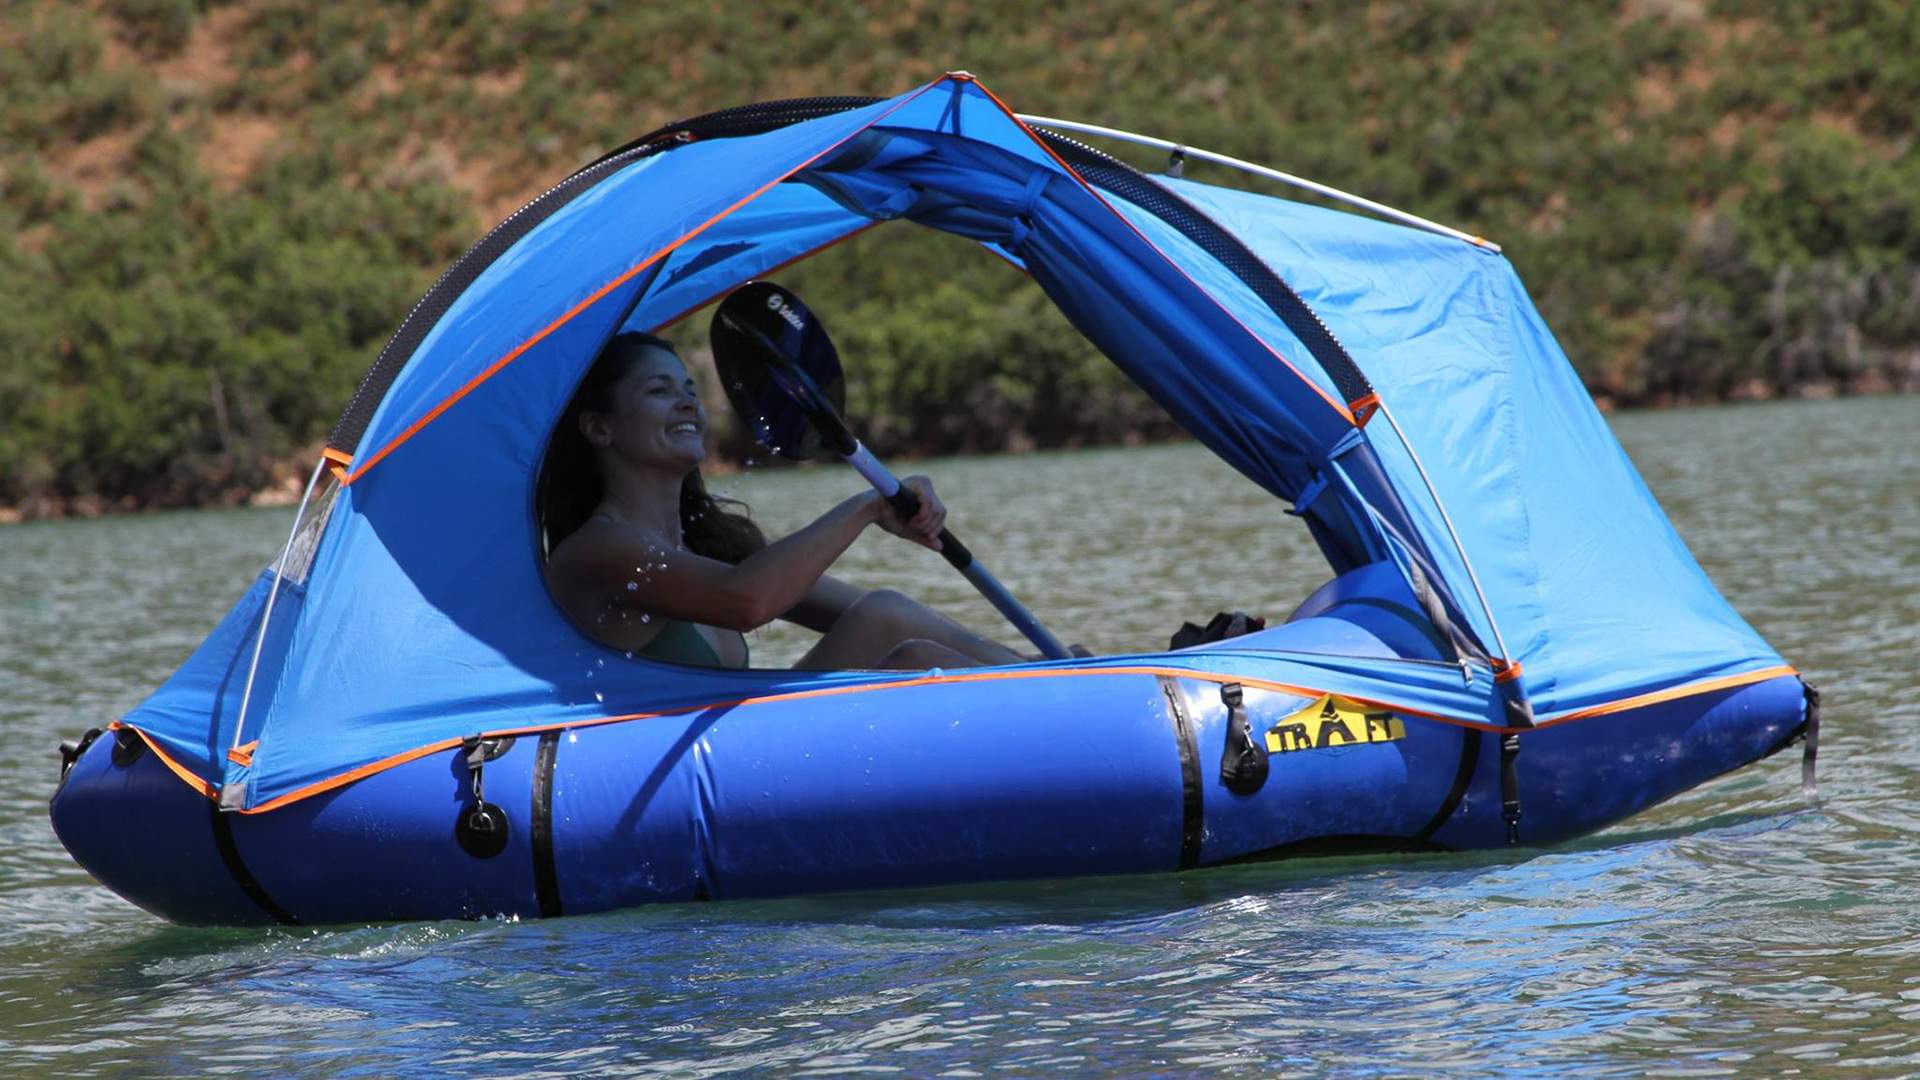 This New Inflatable Tent-Raft Hybrid Will Change the Way You Go Camping